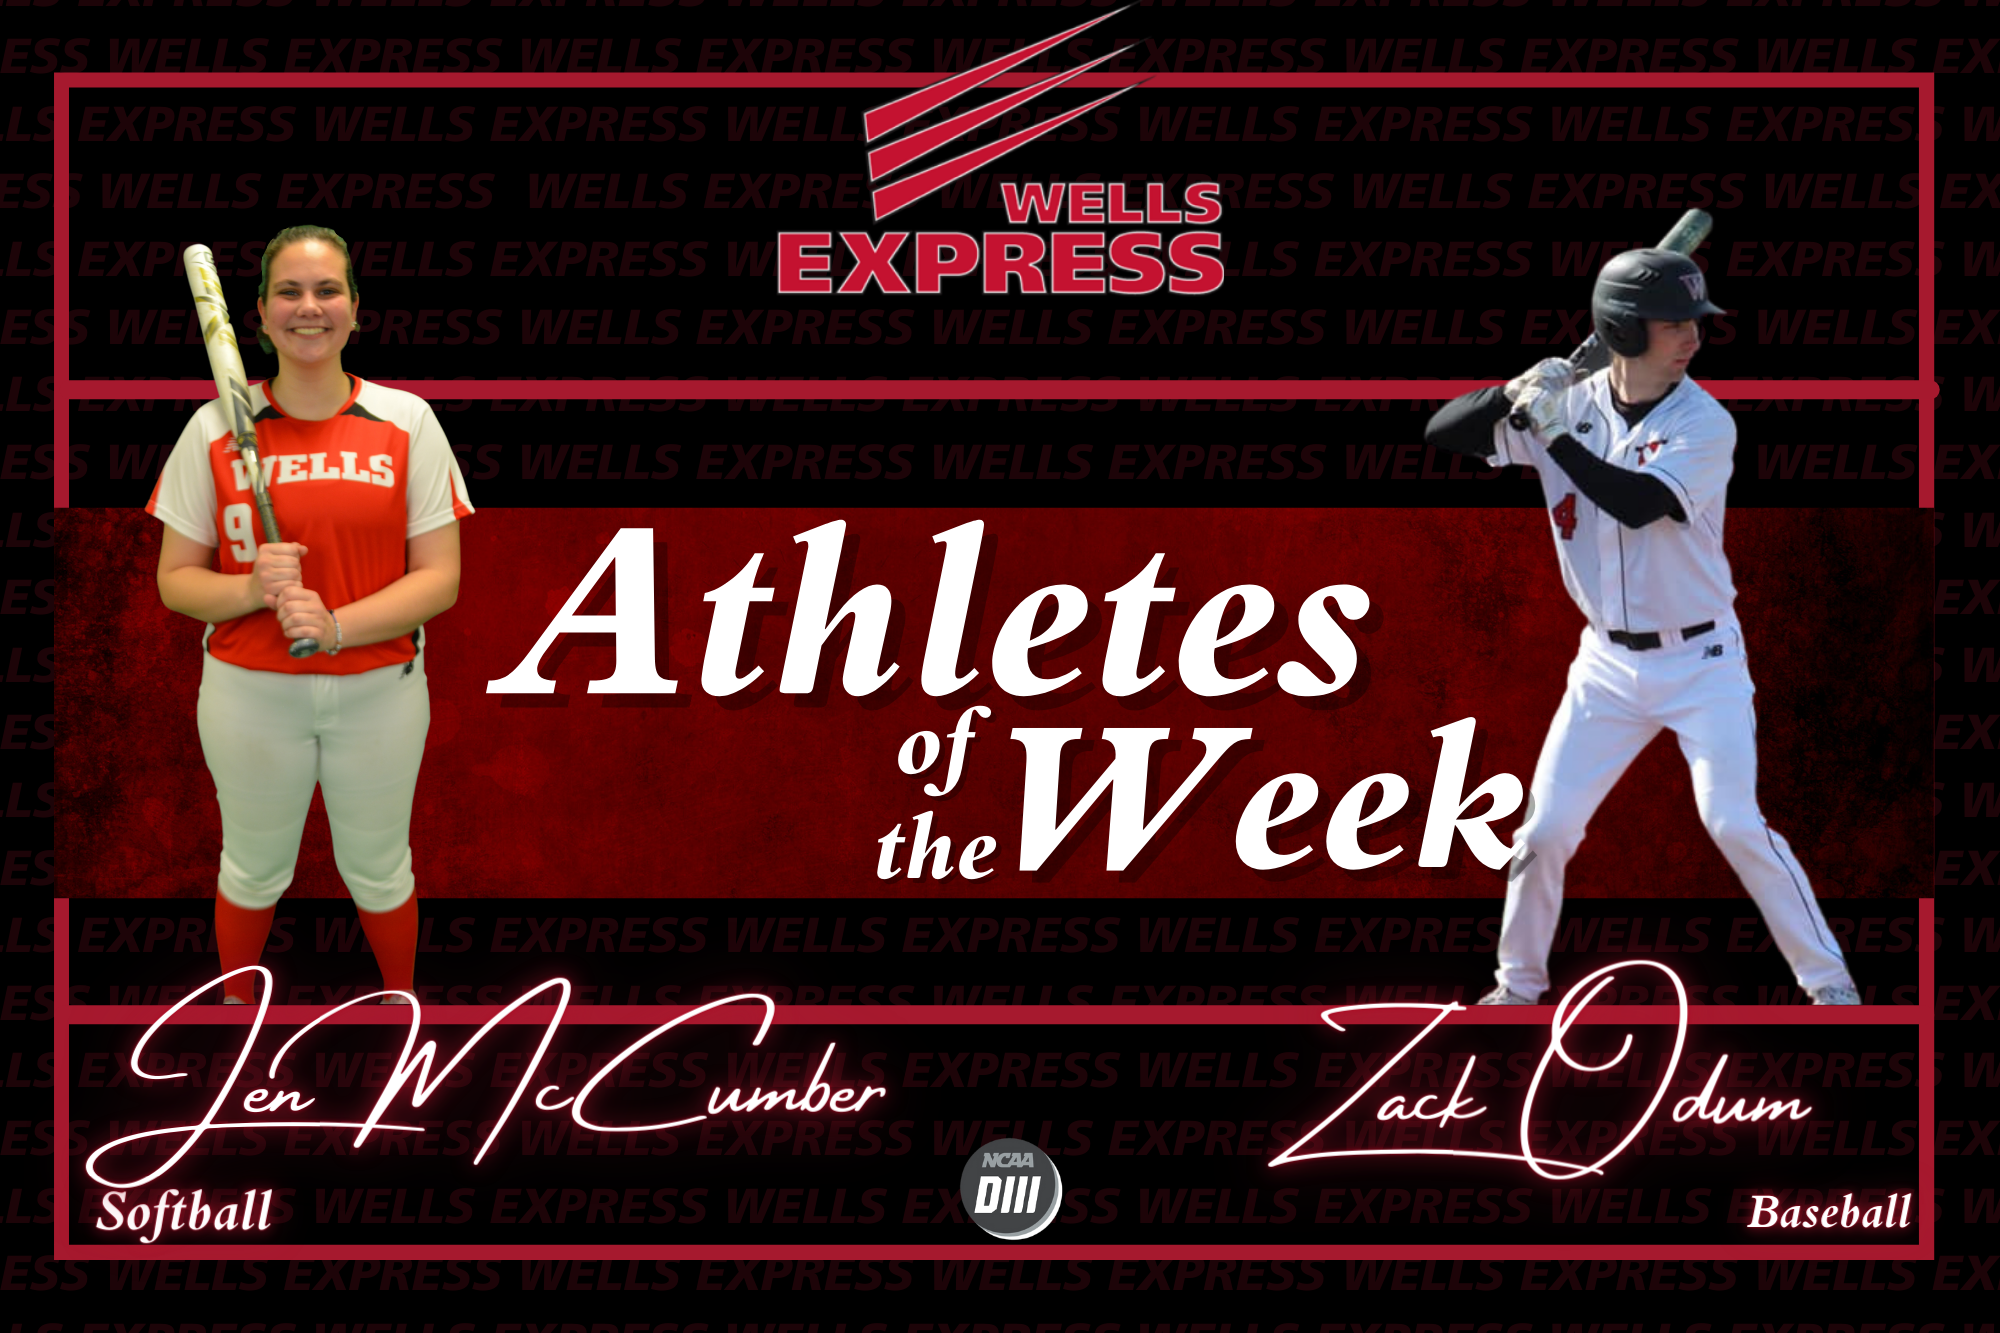 Wells Express Athletes of The Week 4/13